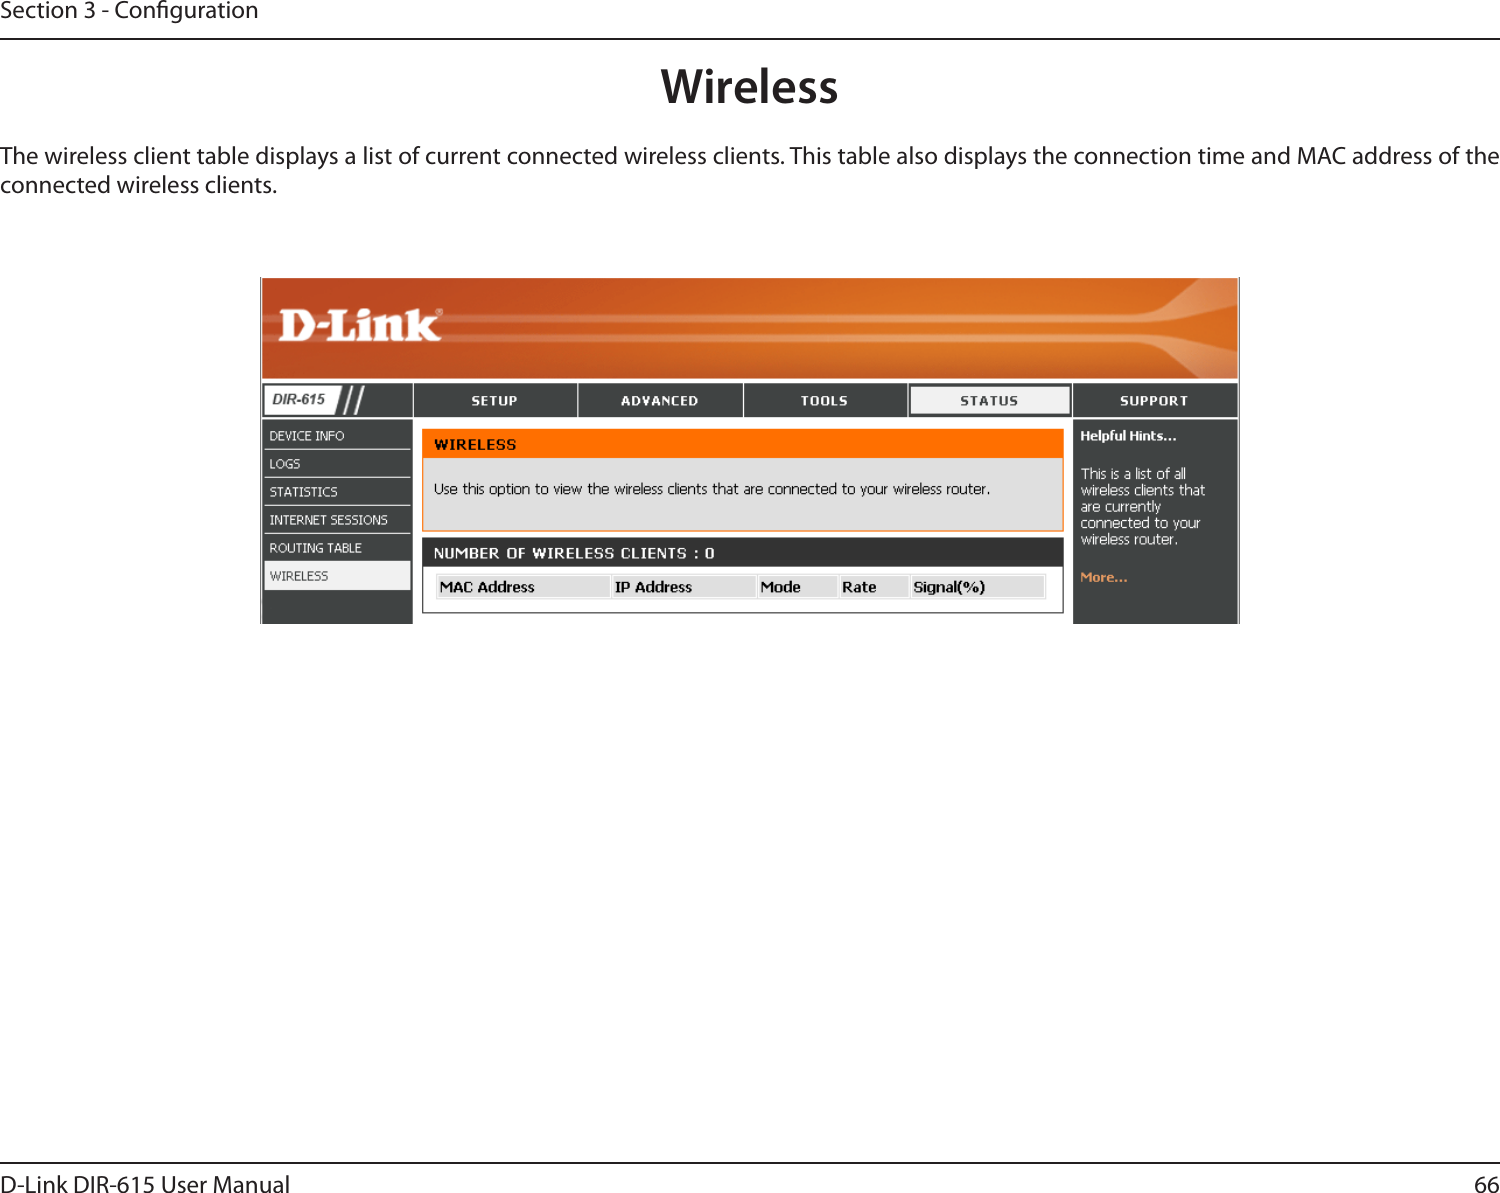 66D-Link DIR-615 User ManualSection 3 - CongurationThe wireless client table displays a list of current connected wireless clients. This table also displays the connection time and MAC address of the connected wireless clients.Wireless